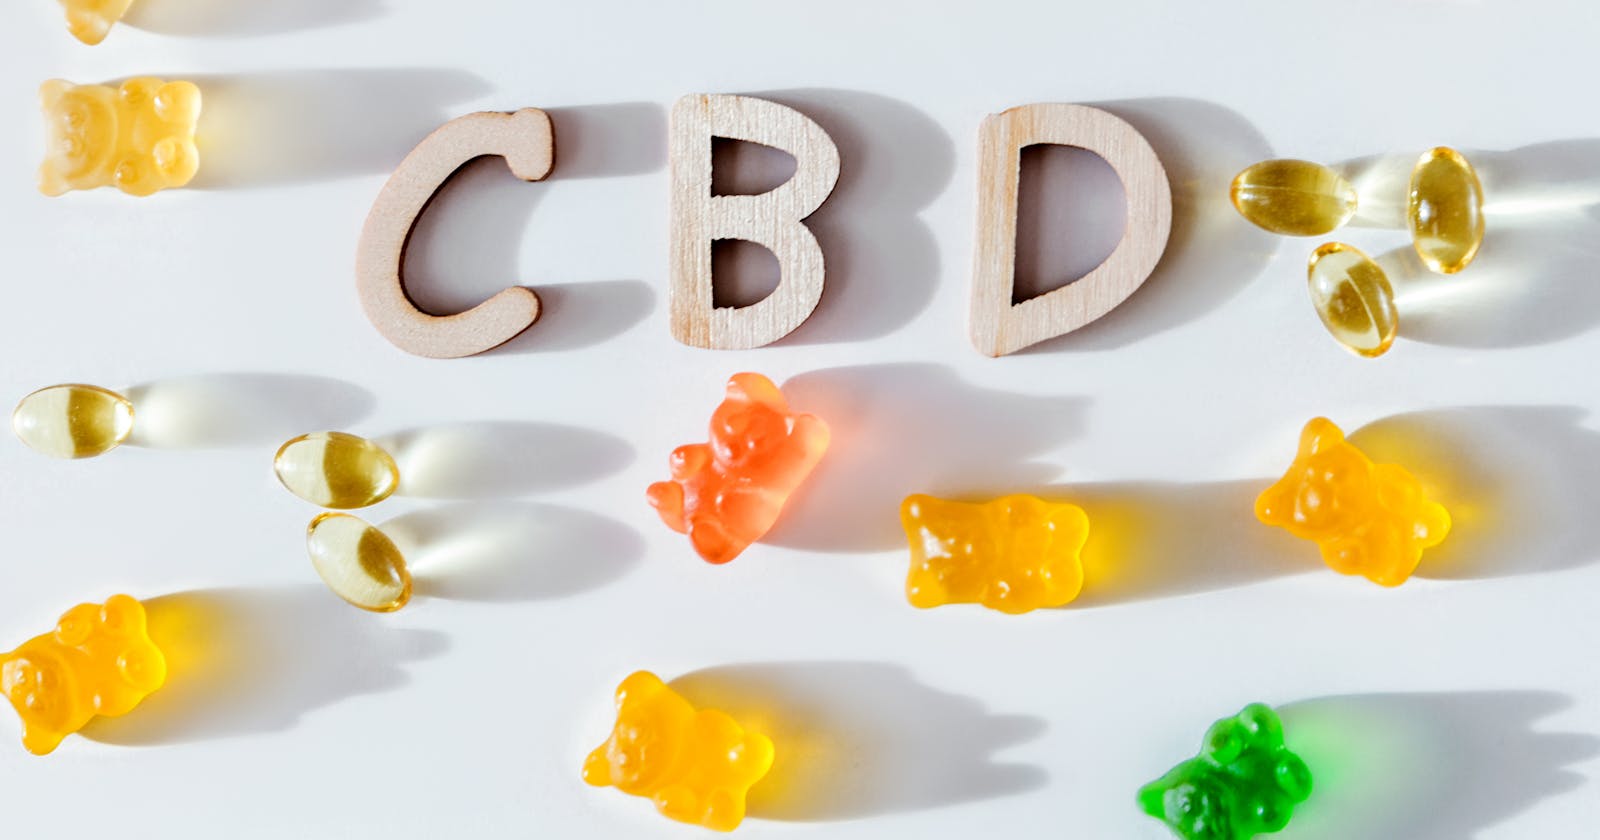 Starlight CBD Gummies THE MOST POPULAR CBD GUMMY BEARS IN UNITED STATES
 READ HERE REVIEWS, BENEFITS, SIDE EFFECT, INGREDIENTS, DOES IT REALLY WORK? I